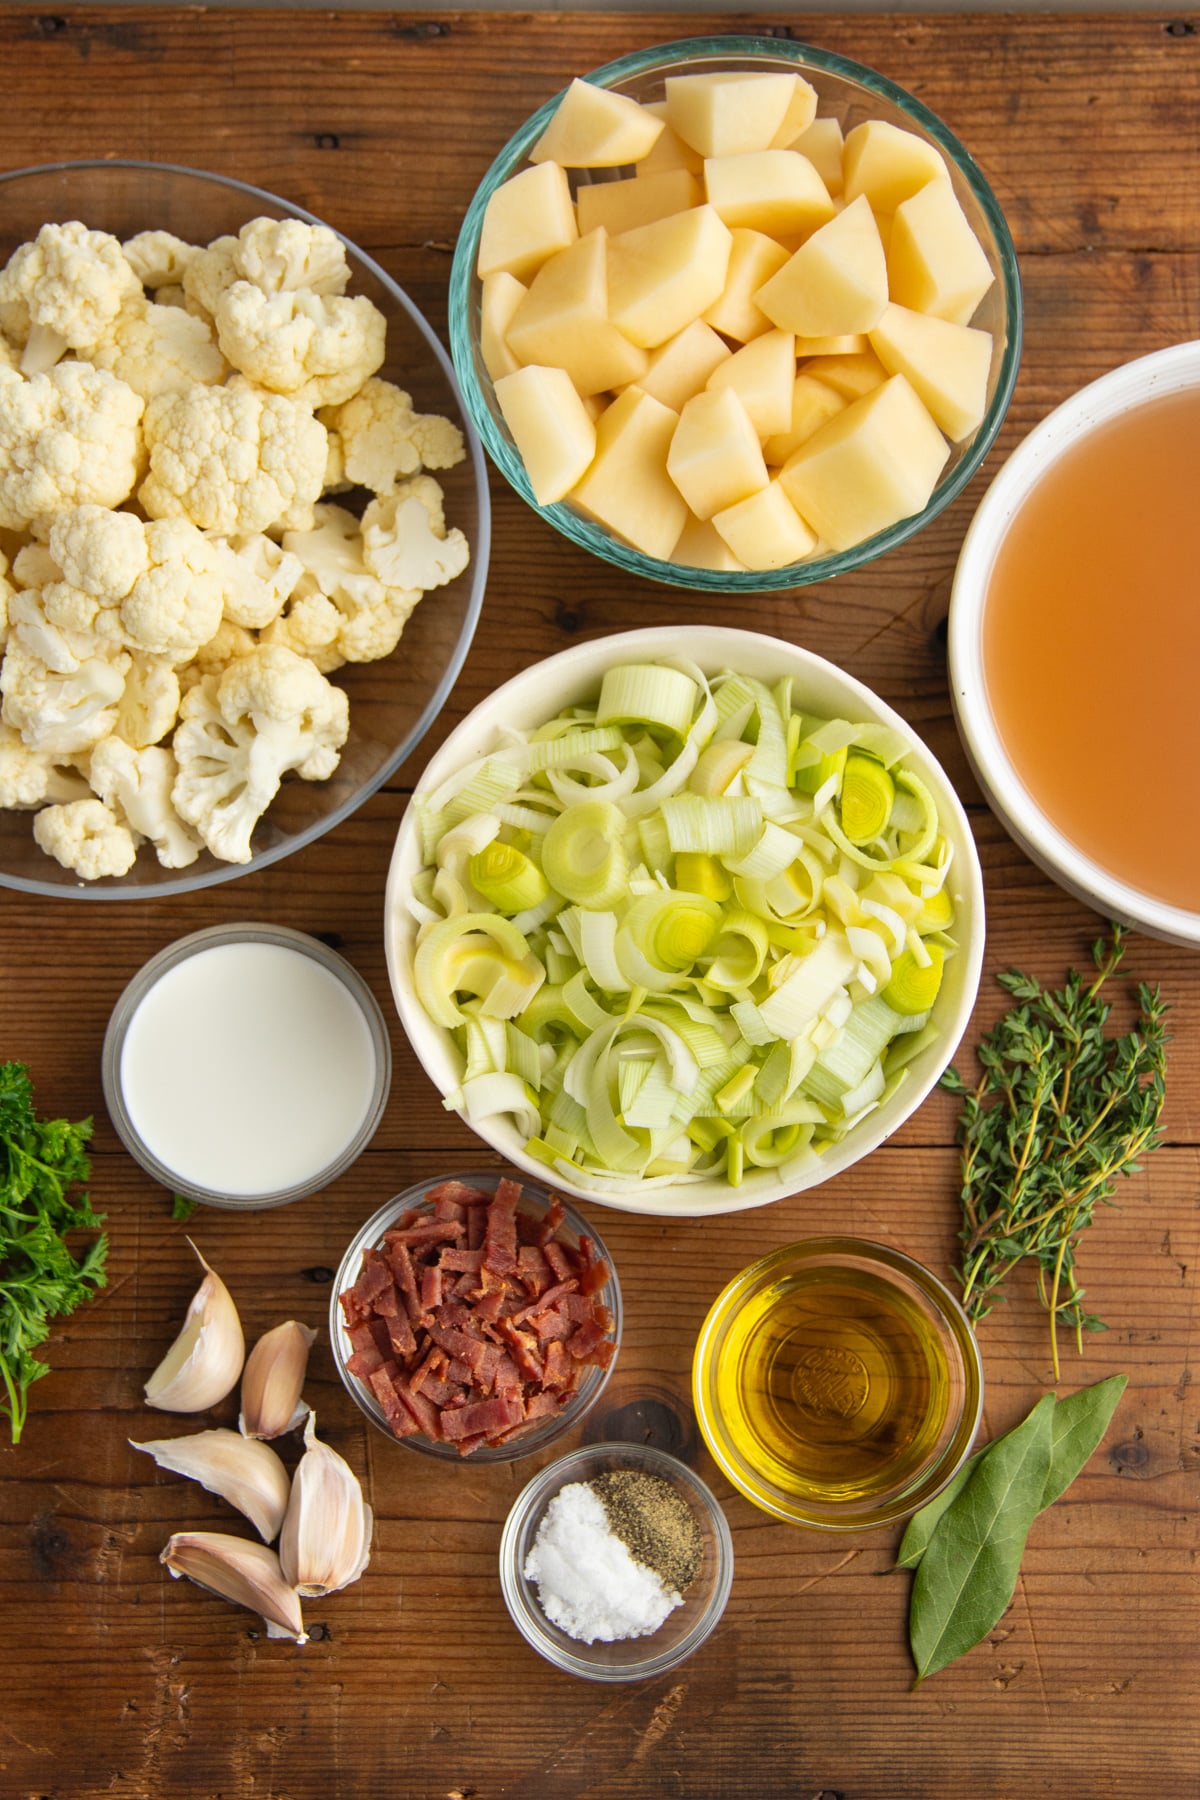 This is a picture of all the ingredients needed to make potato cauliflower leek soup.